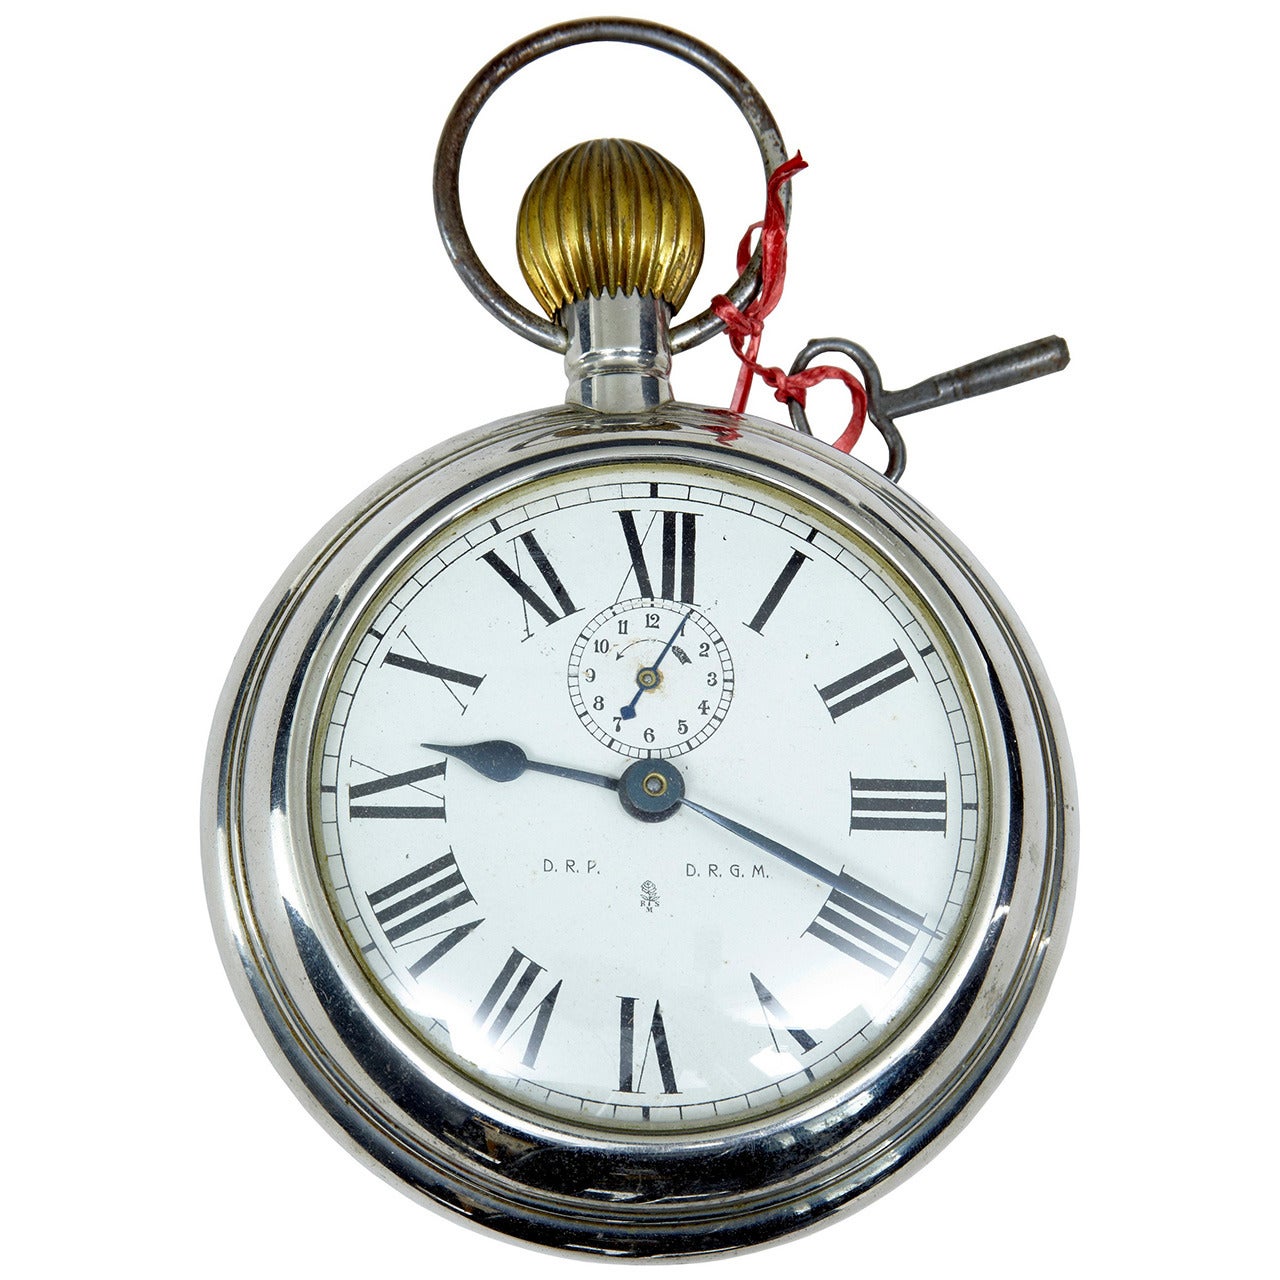 Early 20th Century German Clock in the Form of a Pocket Watch, Marked D.R.G.M